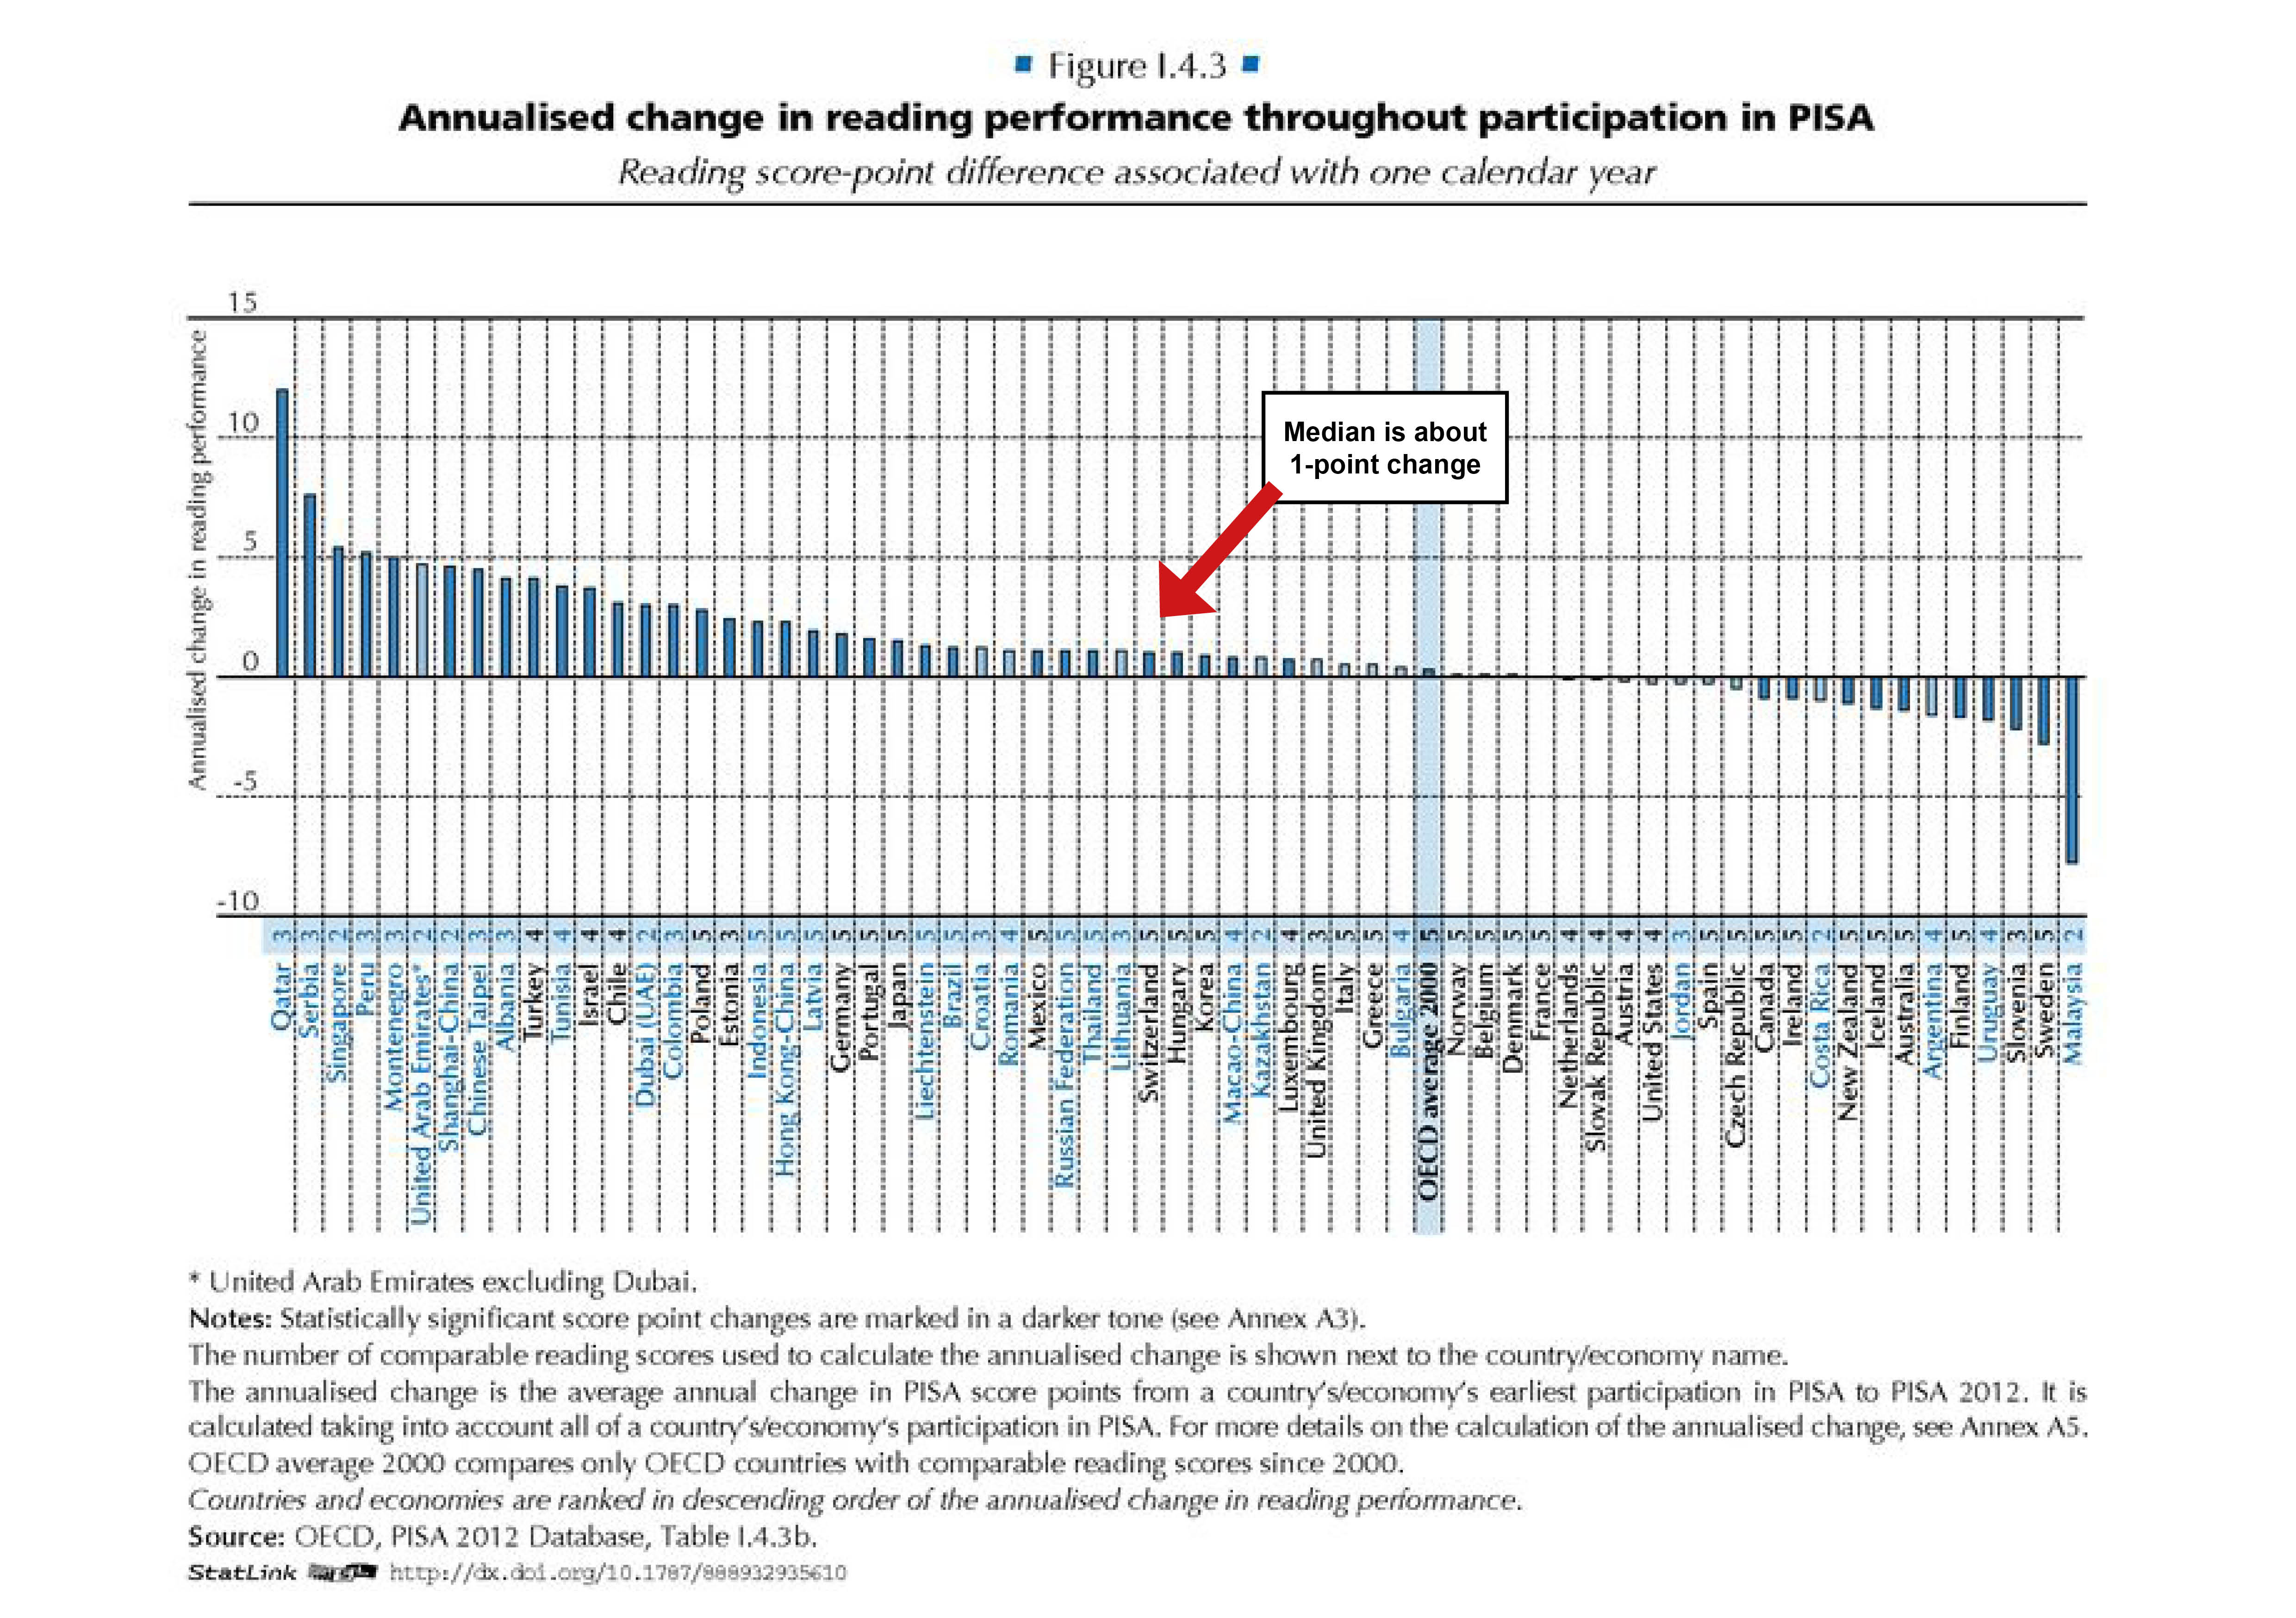 Chart showing change in reading performance throughout PISA participation